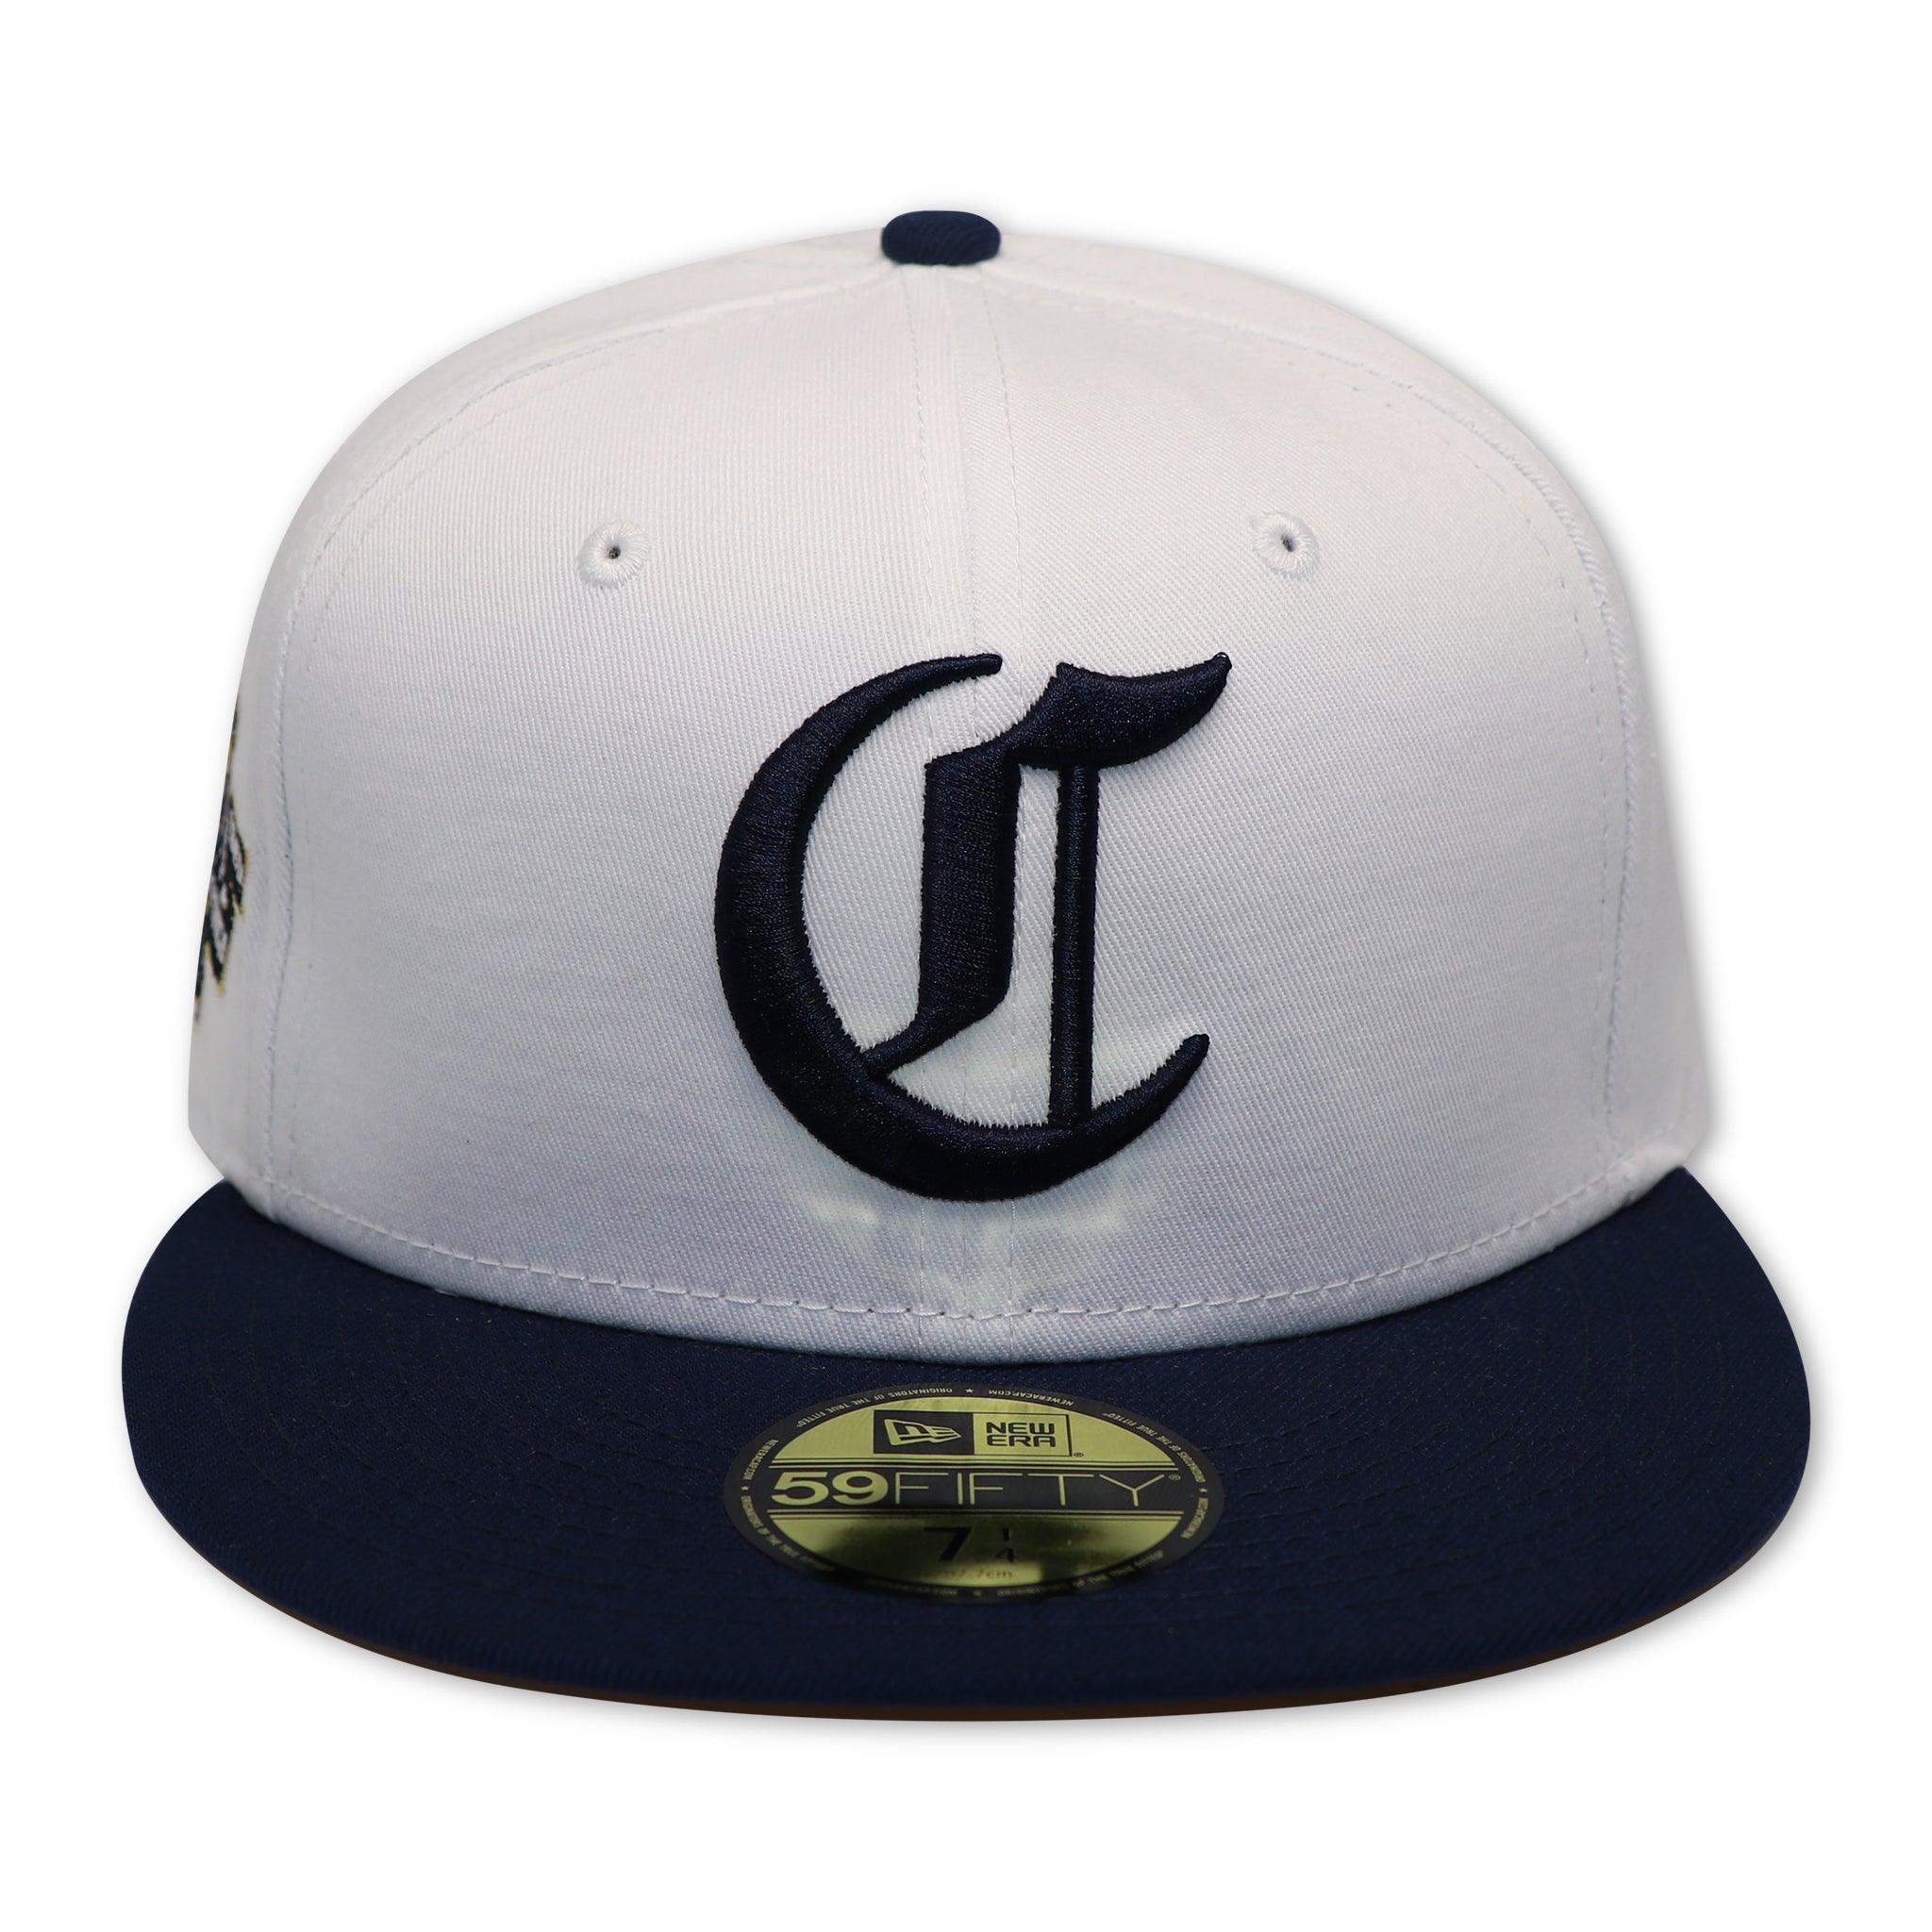 CINCINATTI REDS "150TH ANNIVERSARY" 59FIFTY FITTED (GOLD UNDER VISOR)